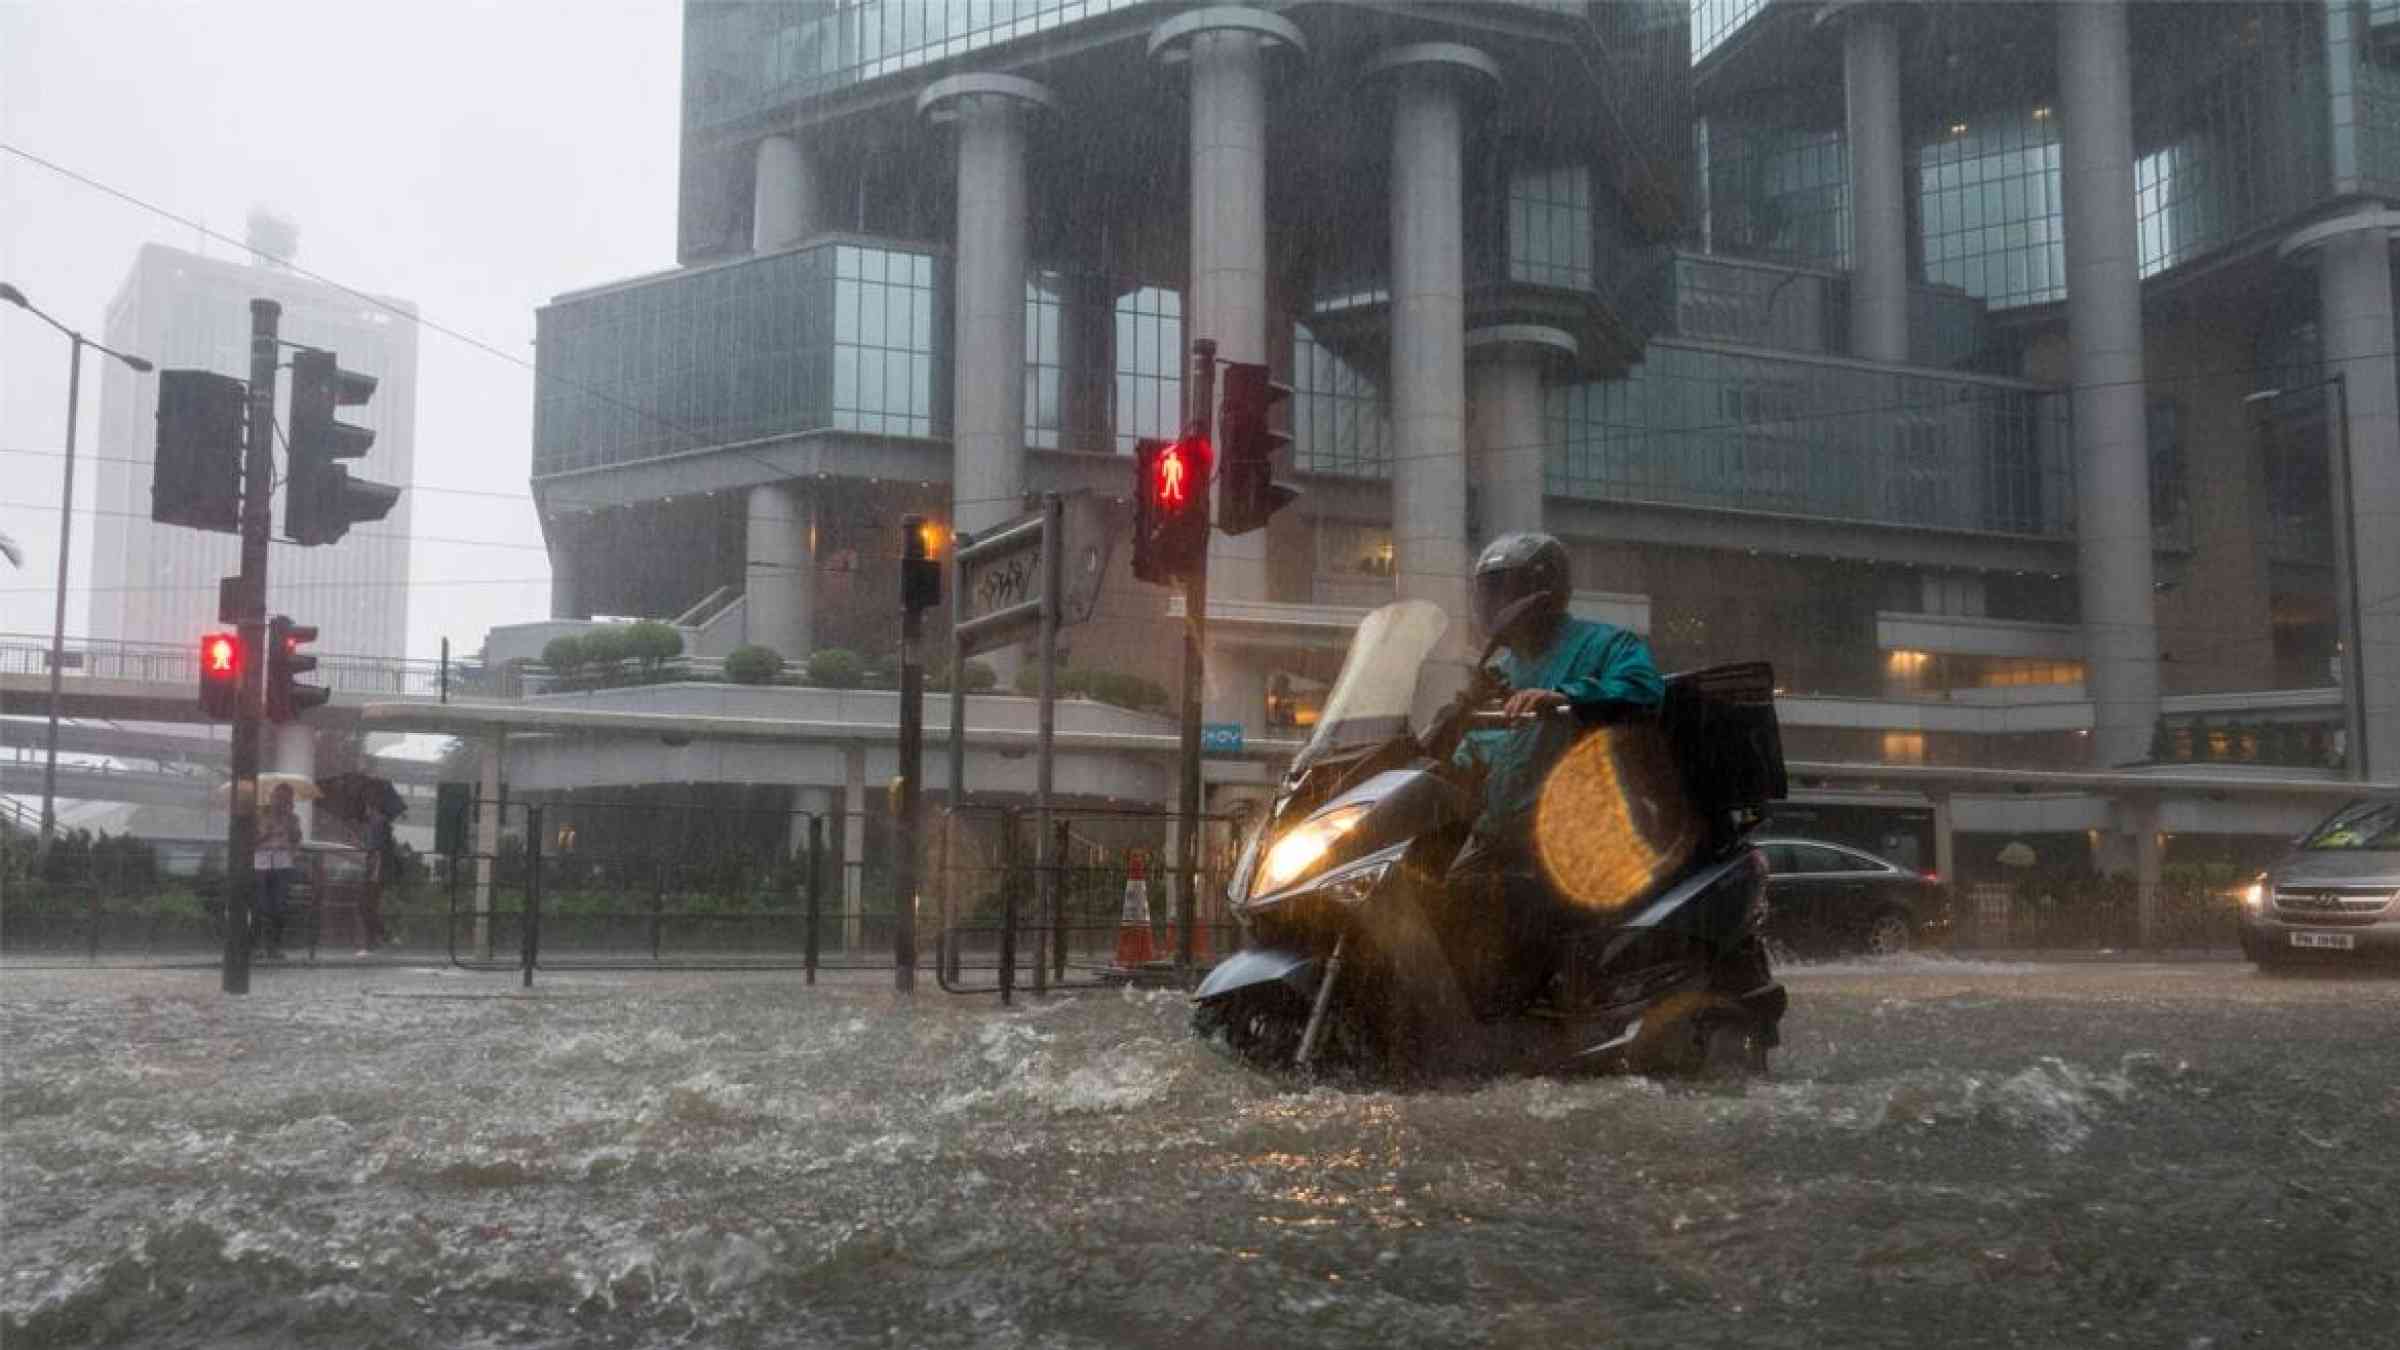 A motorcyclist drives through an inundated street during a rainy day in Hong Kong